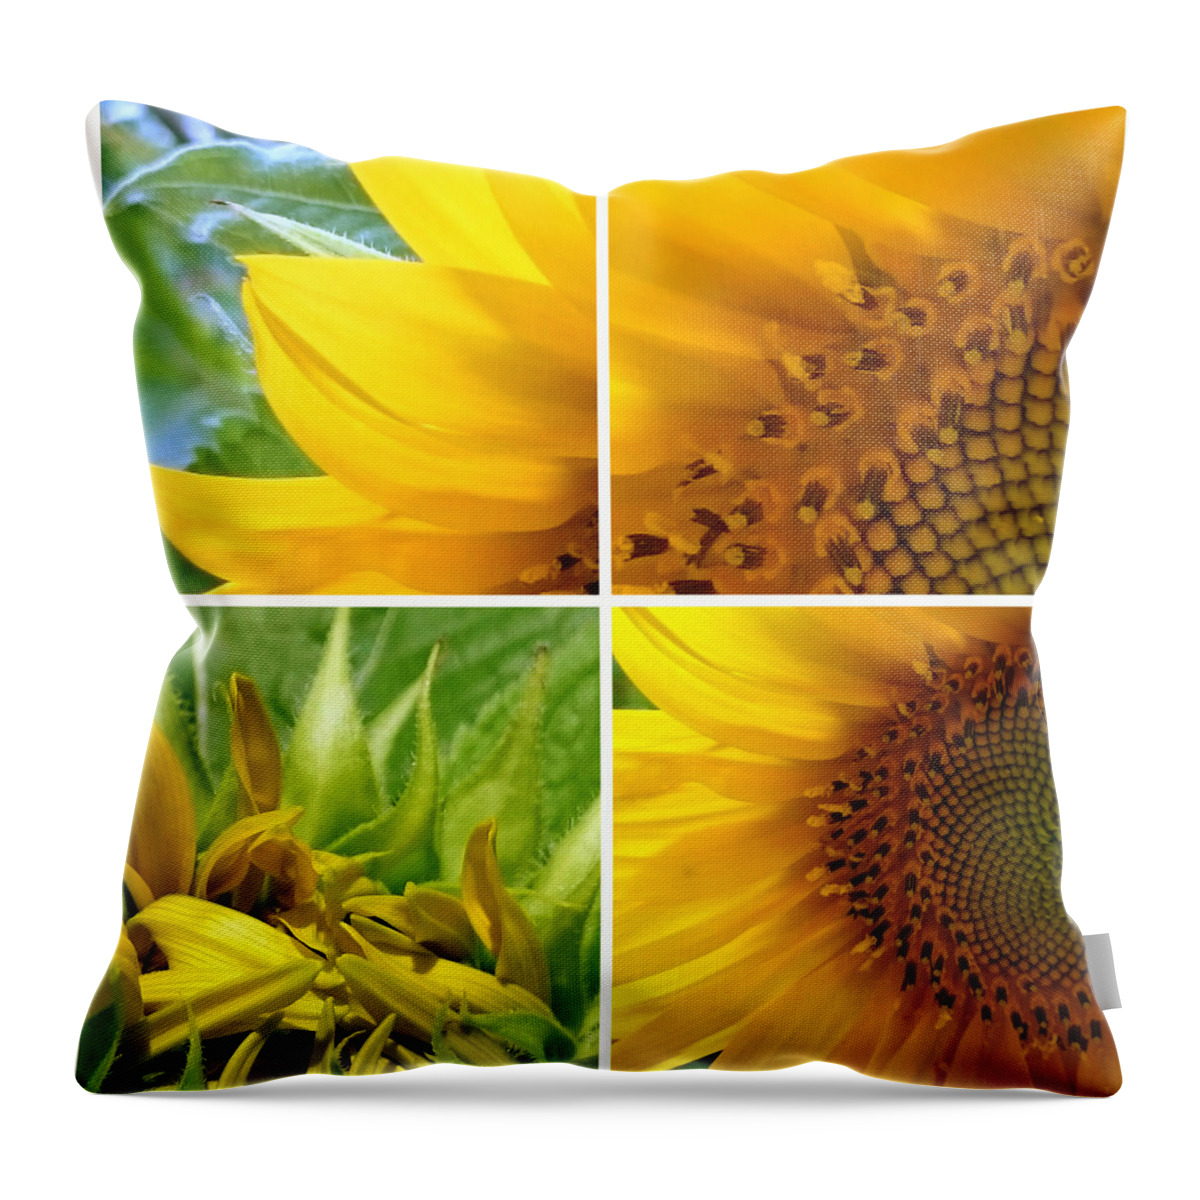 #photographed #sony #sonyxperiaz2 #color #all_shots #composition #sunflowers #art #pics #jacquelineschreiber #colorful #xperia #beautiful #picoftheday #photooftheday Throw Pillow featuring the photograph Sunflower -1 by Jacqueline Schreiber